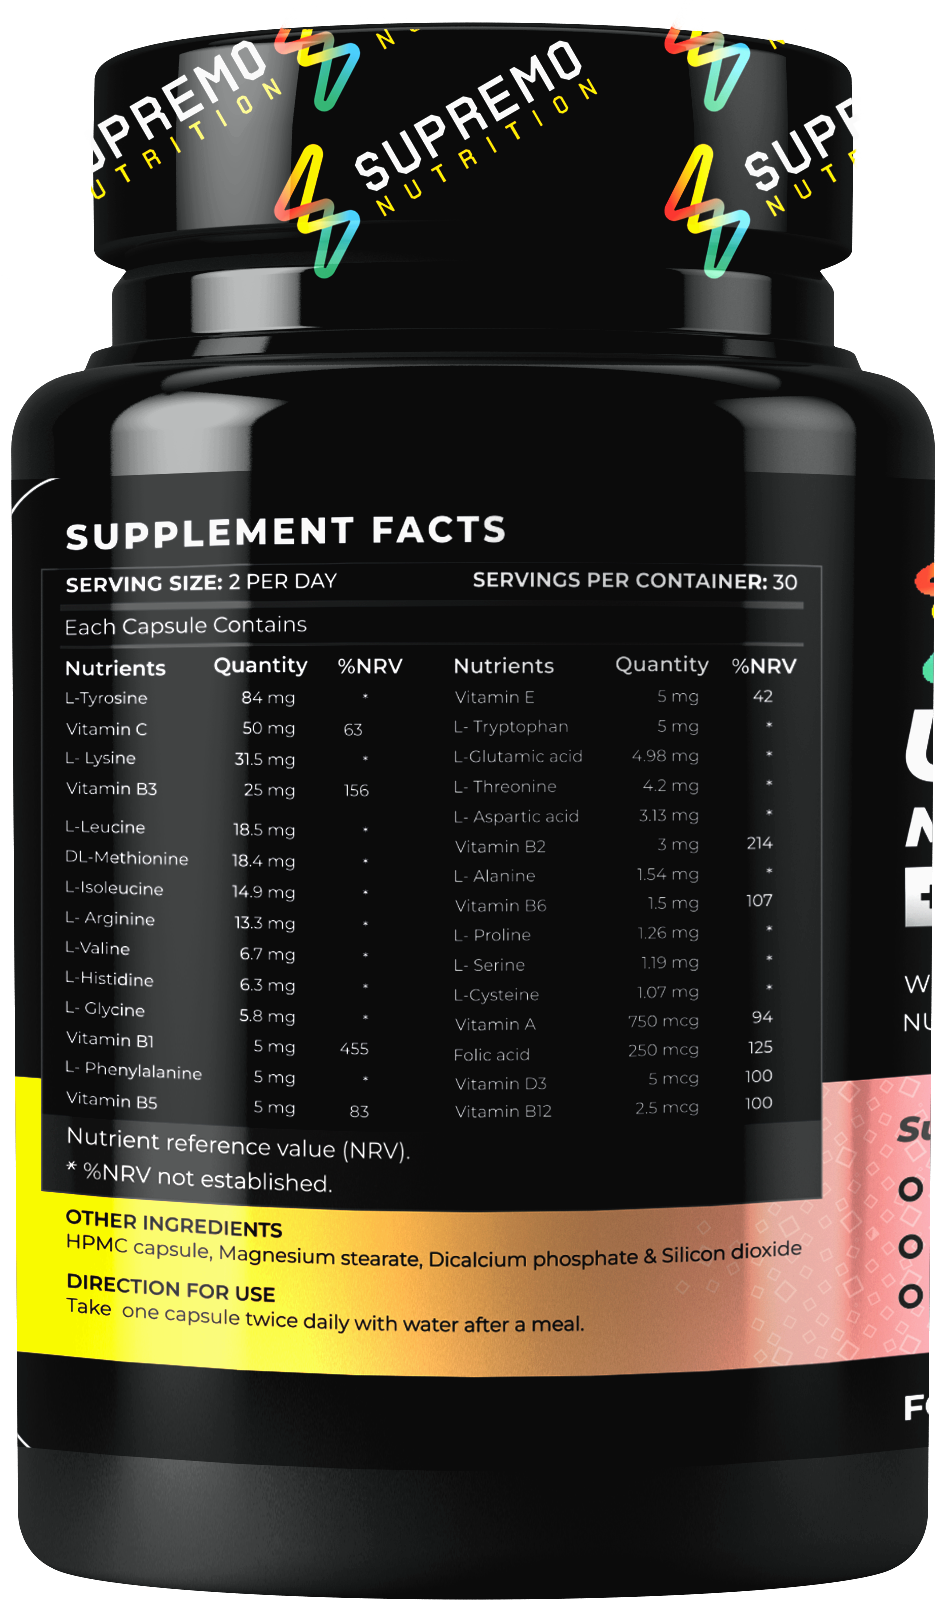 Ultimate Multivitamins + Amino Acid, Supports Healthy Metabolism, Supports Immune Function, Supports Energy, Strength & Stamina, 60 Capsules